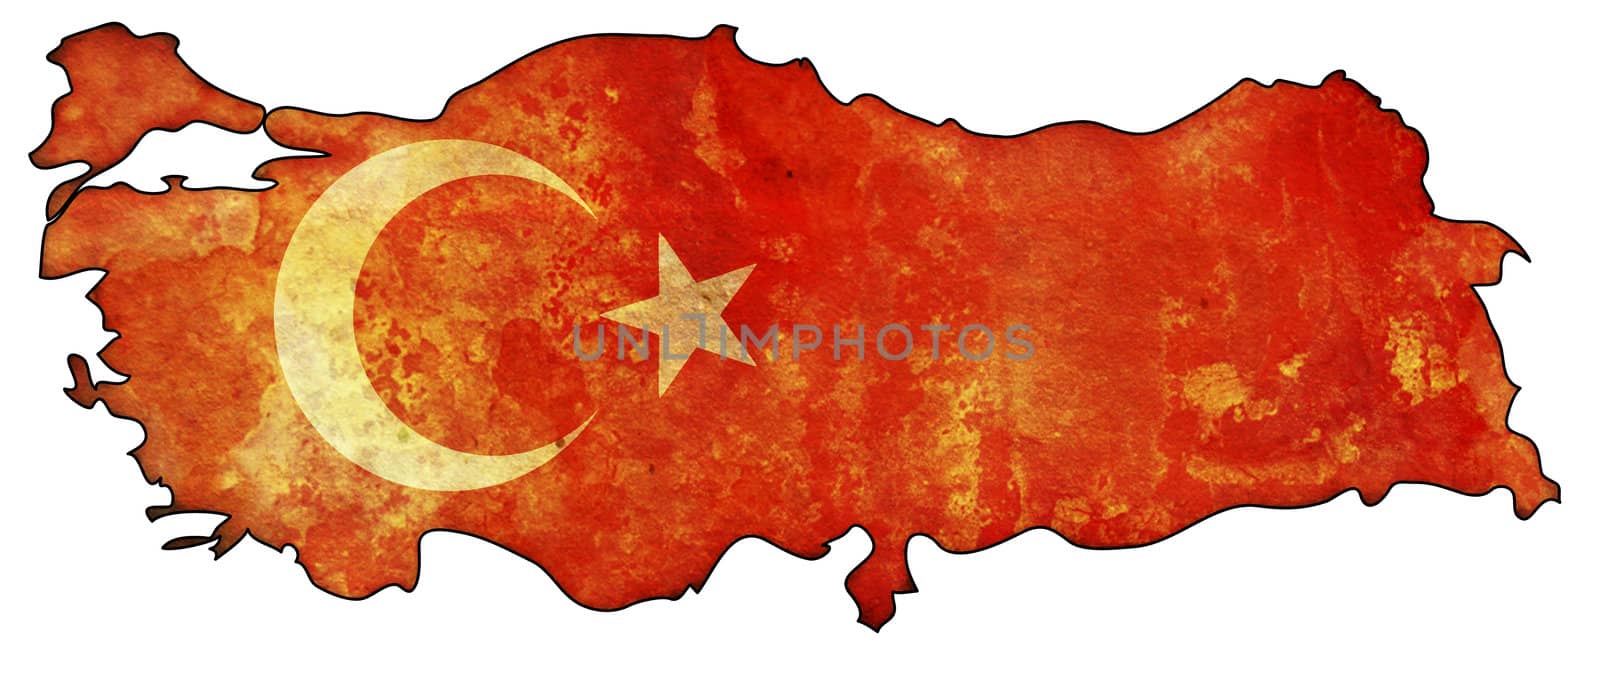 turkey flag on territory by michal812